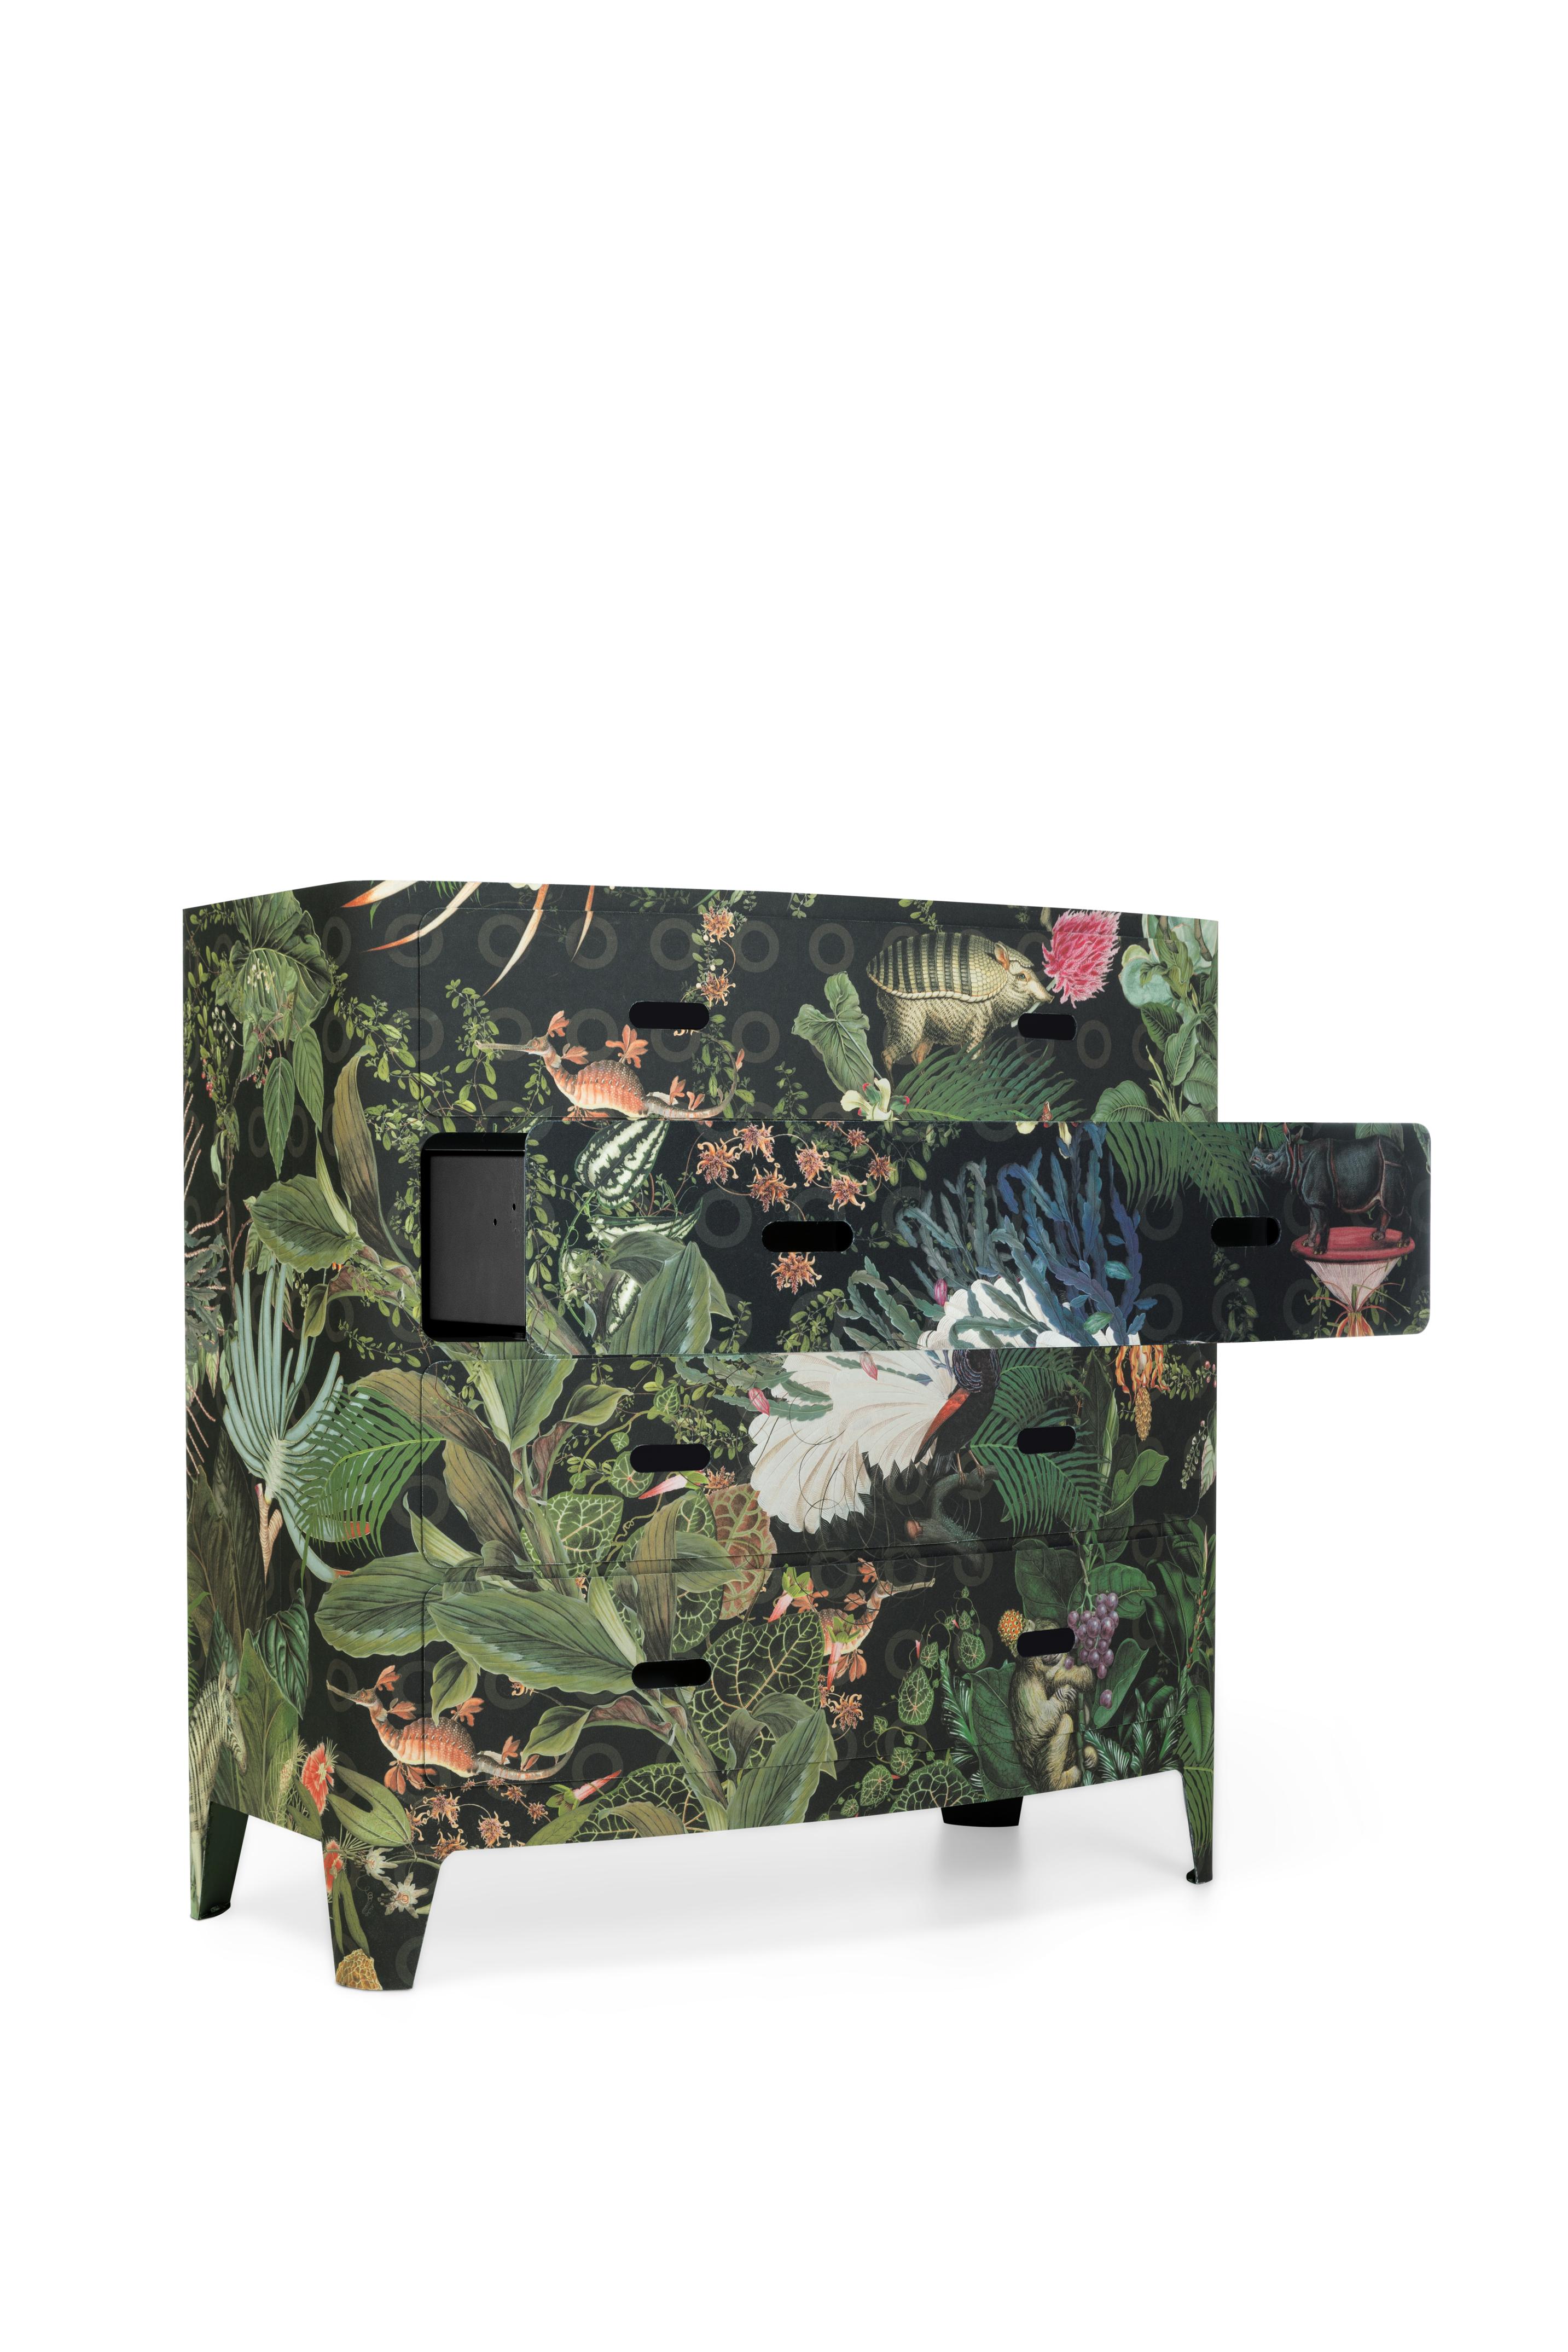 Modern Moooi Editions, Eek Dresser Menagerie of Extinct Animals Raven, Limited #1/10 For Sale